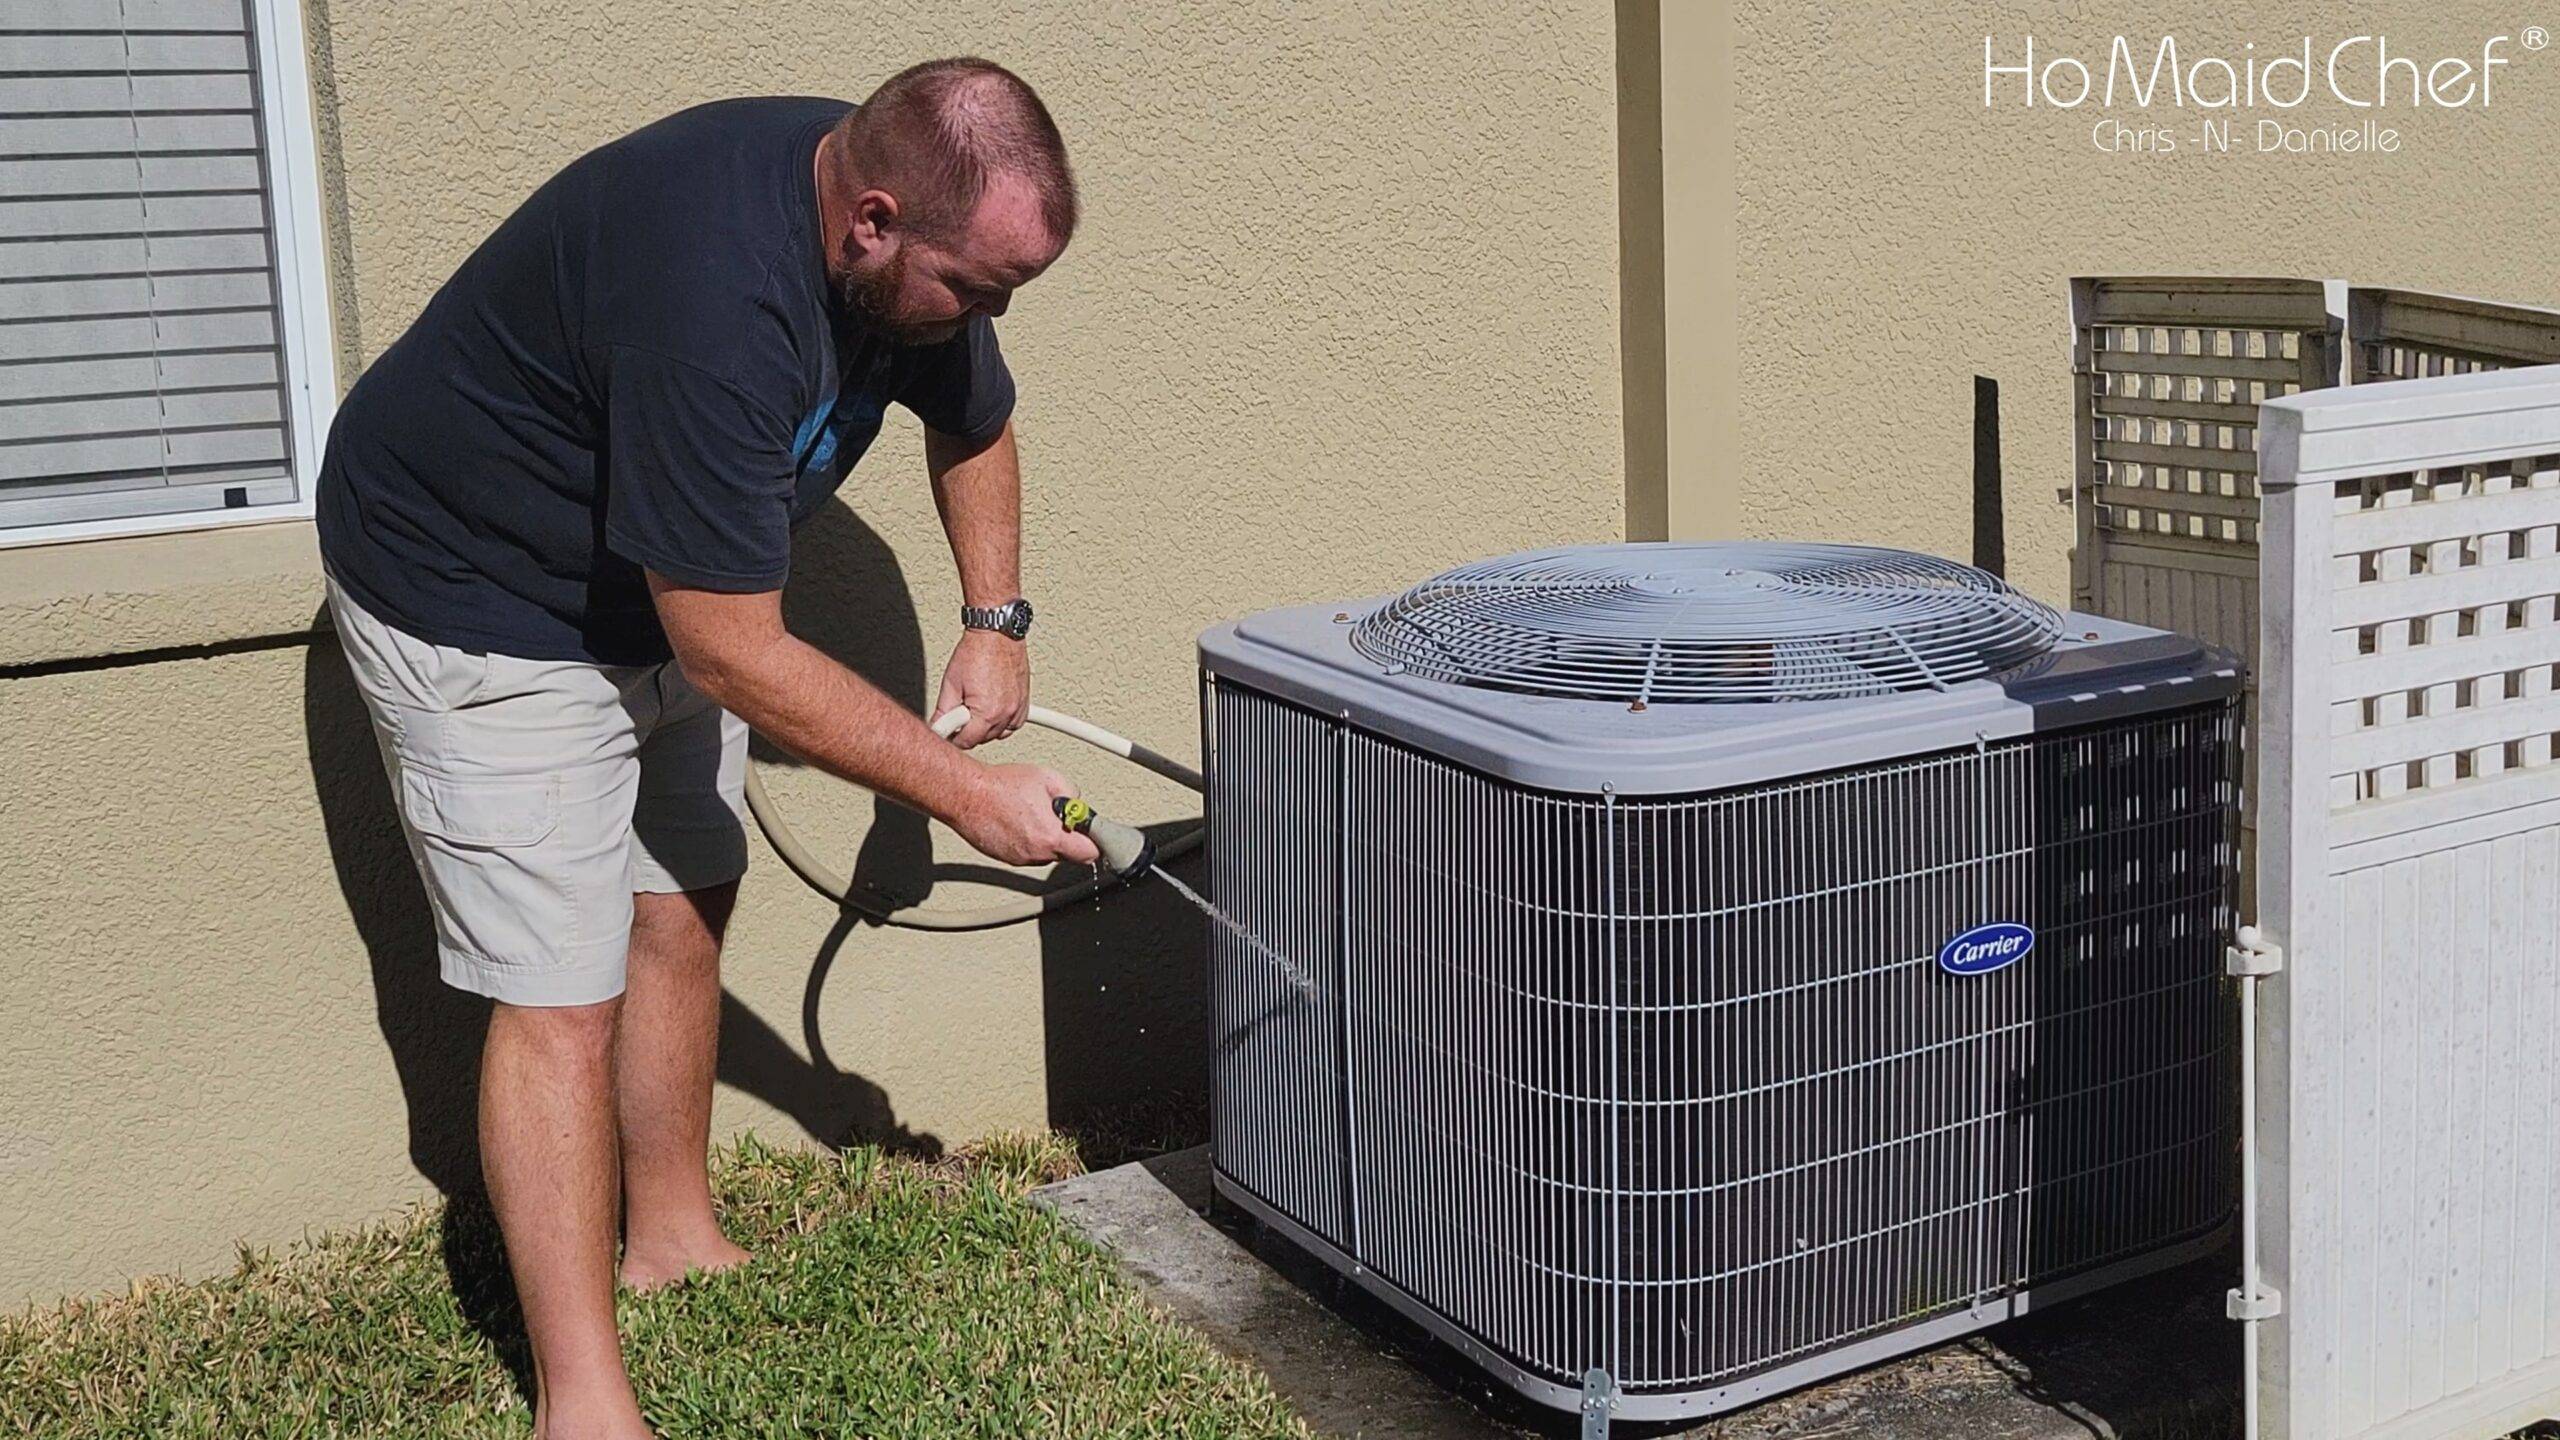 Quarterly Maintenance For Your AC Condenser - Chris Does What